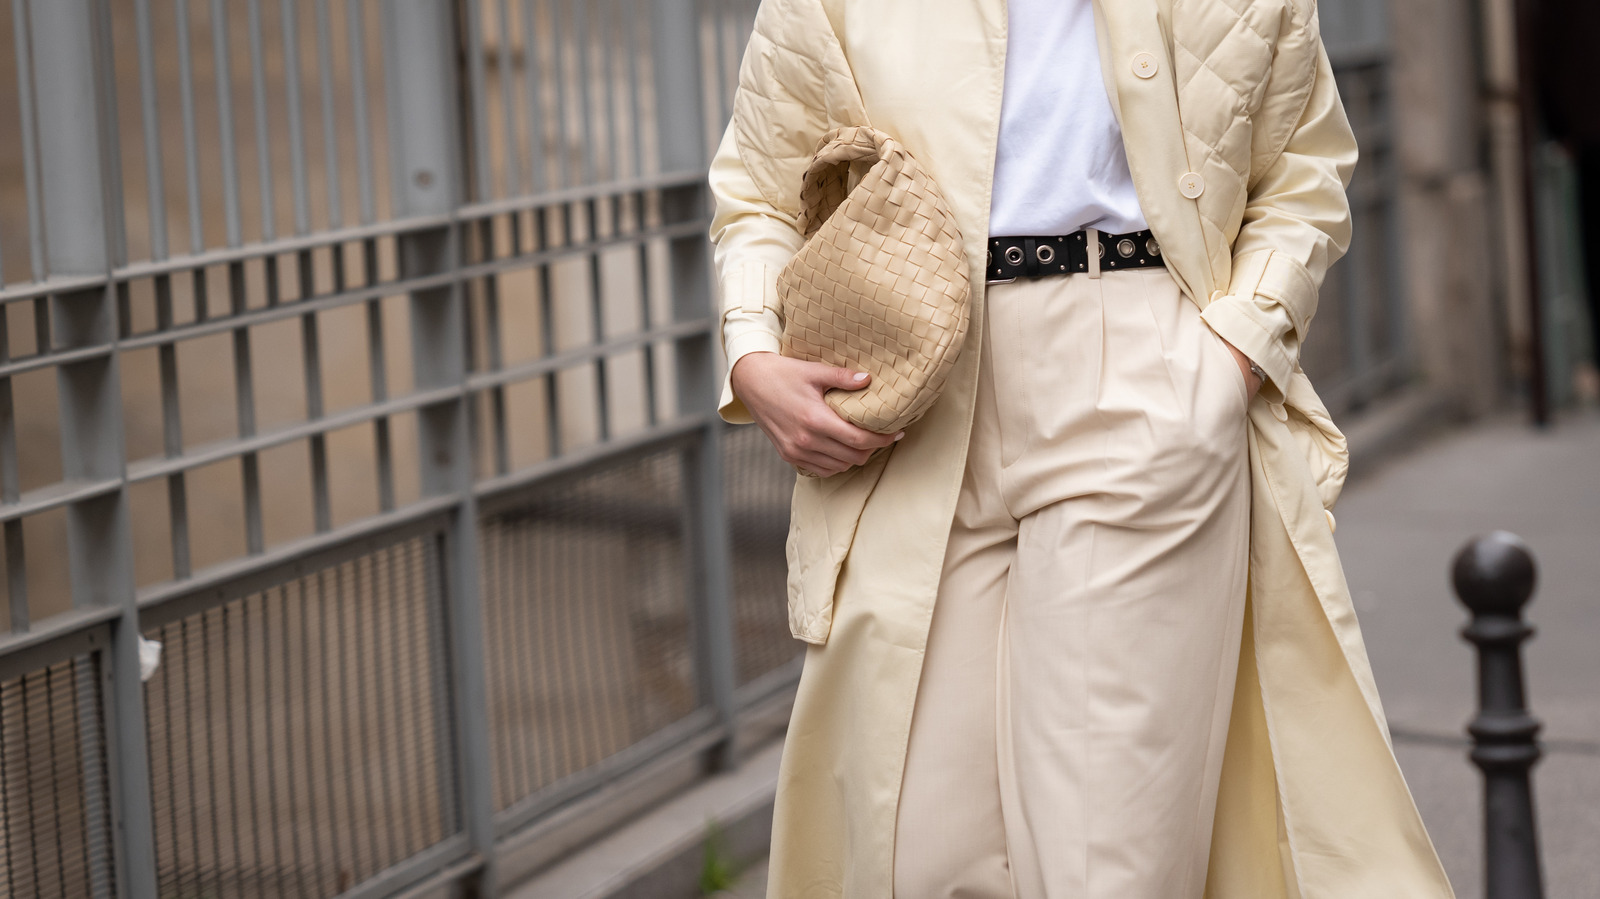 Styling Trousers Outside The Office Isn't A Hassle With These Tips